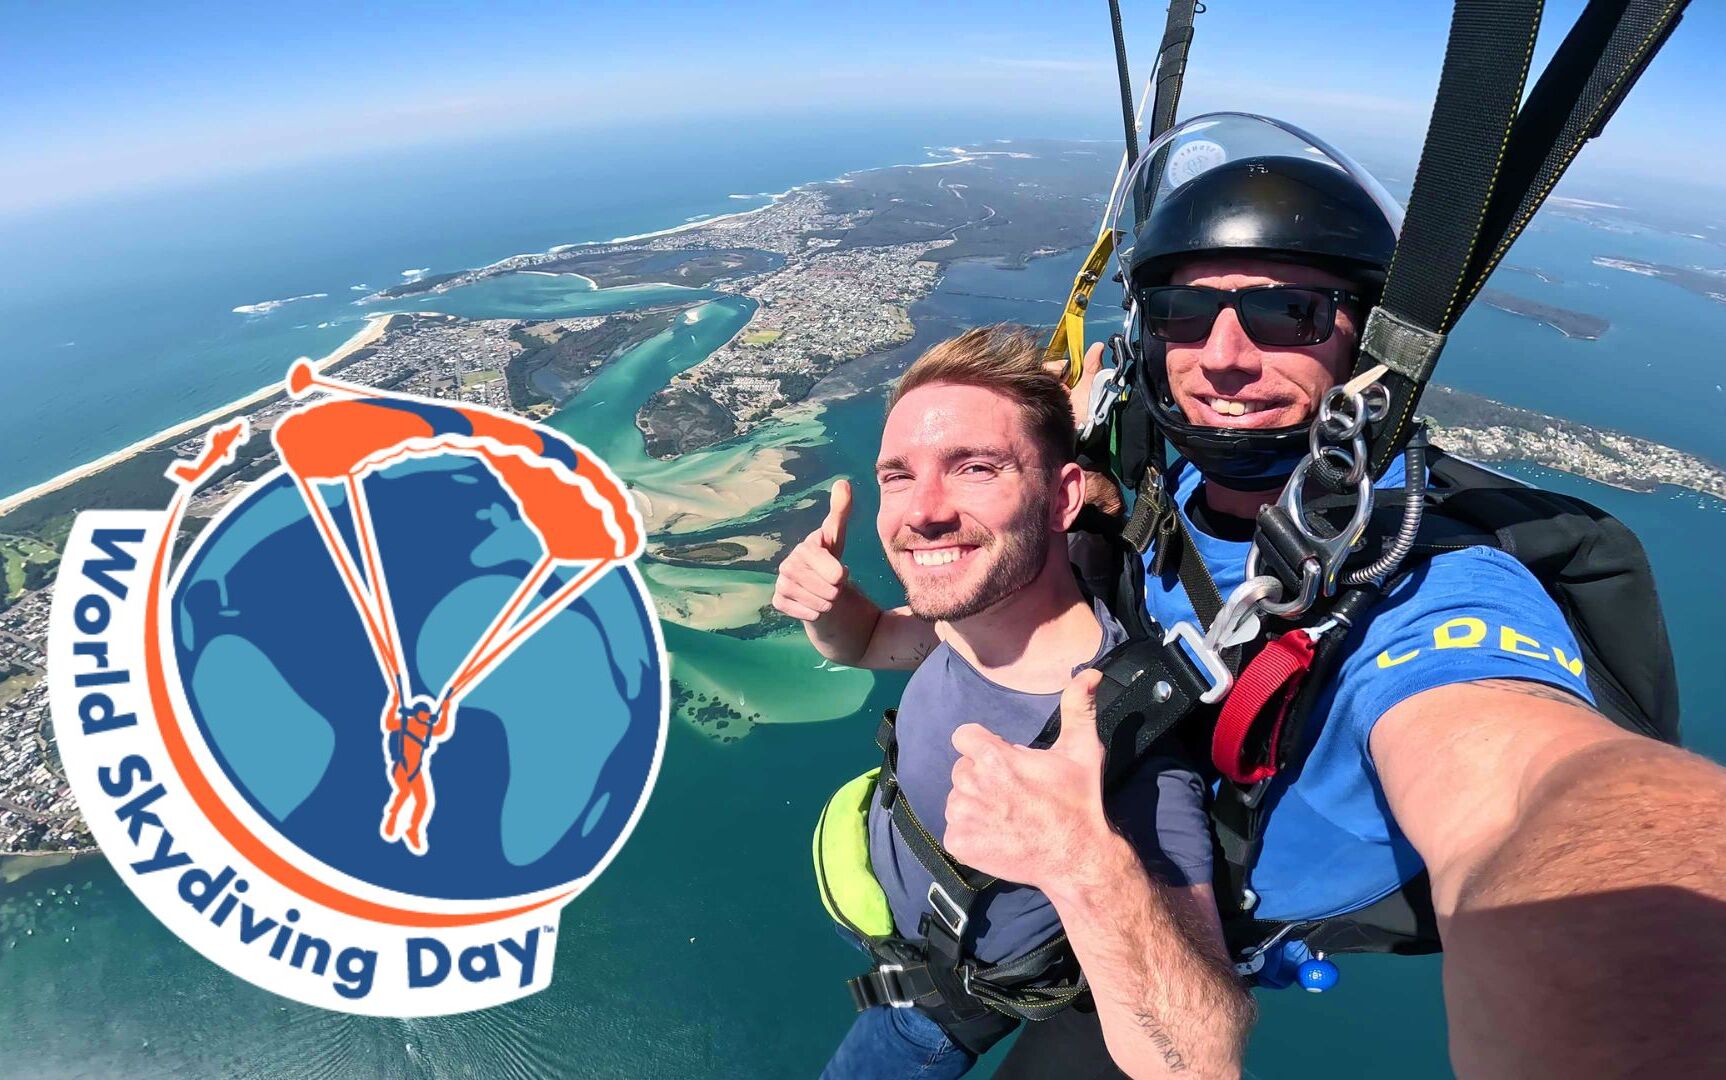 World Skydiving Day: An Event for New and Experienced Skydivers